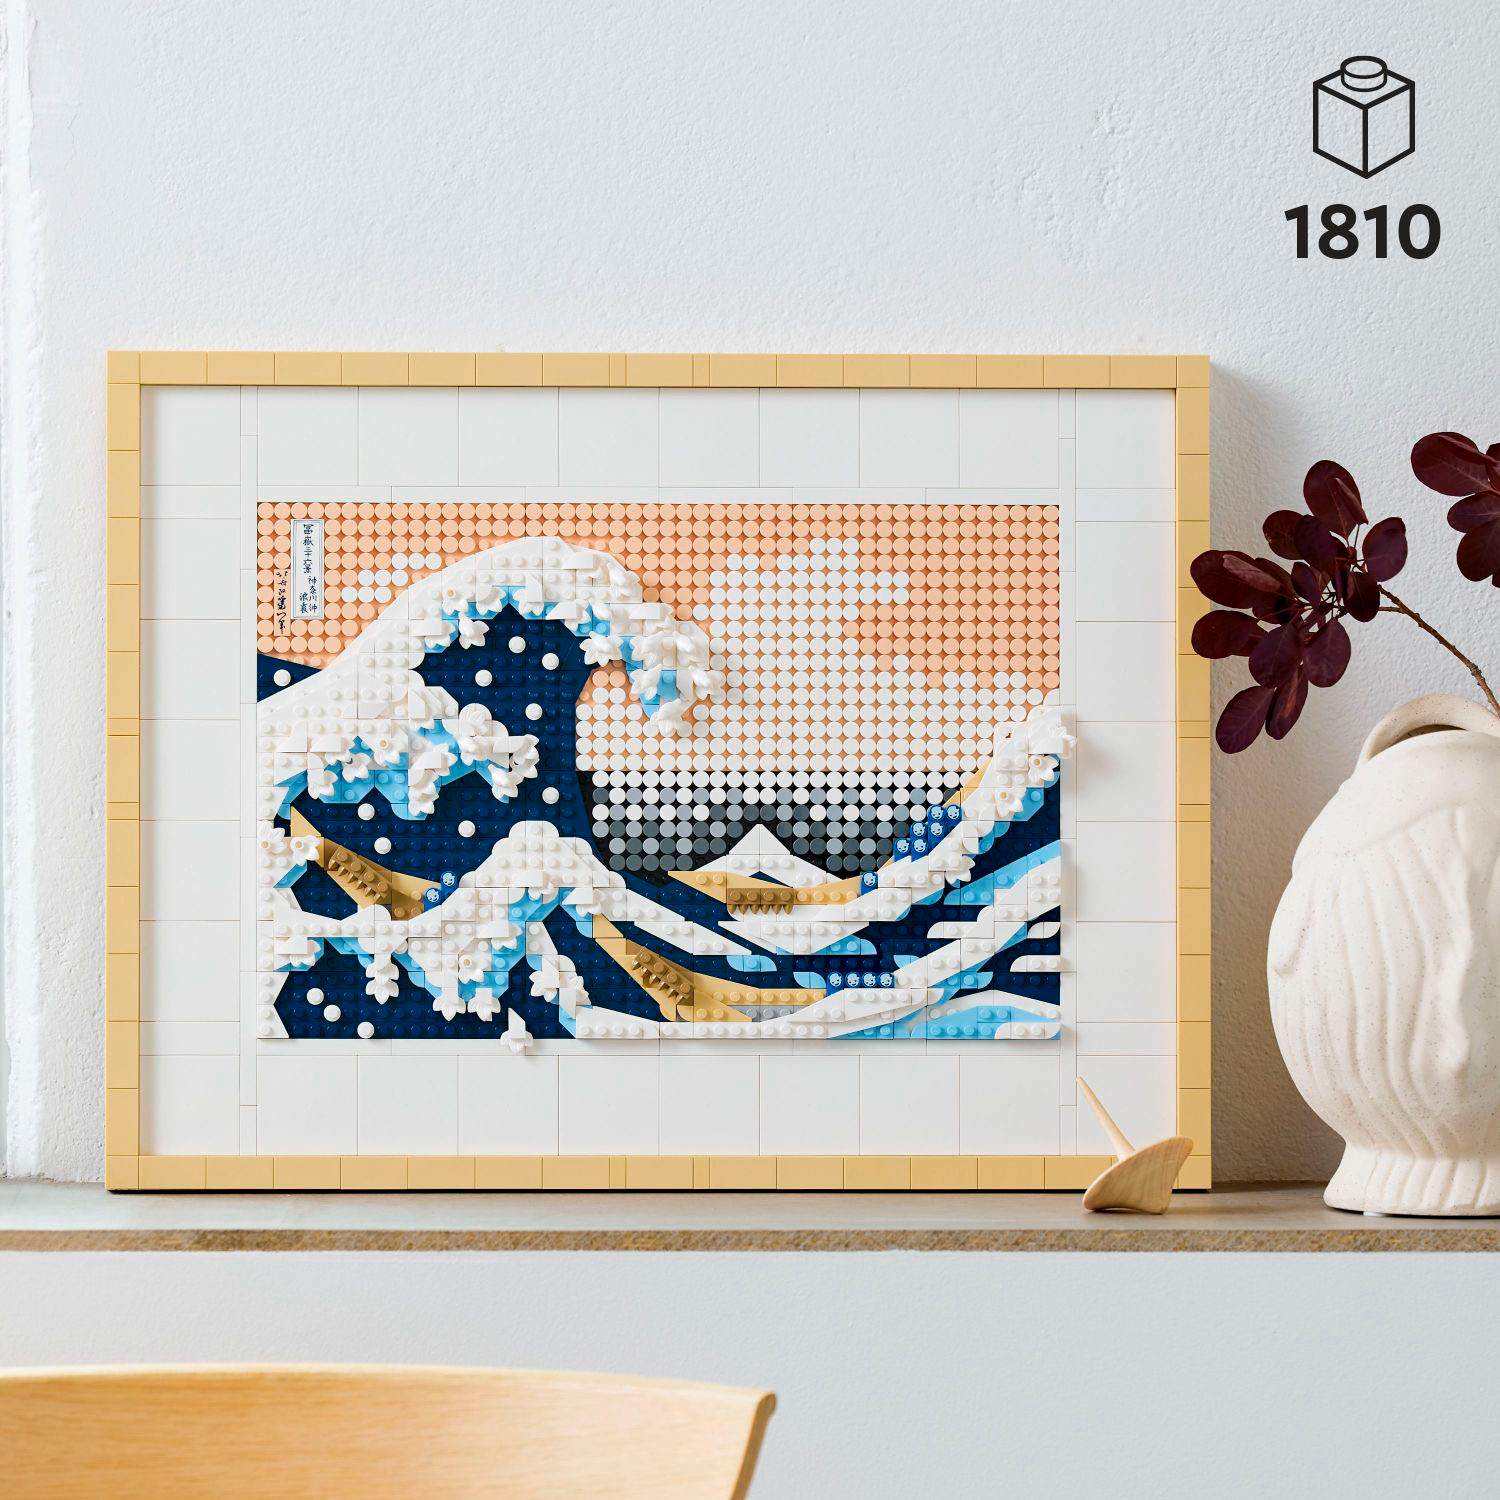 LEGO Art Hokusai – The Great Wave 31208 6425631 - Best Buy